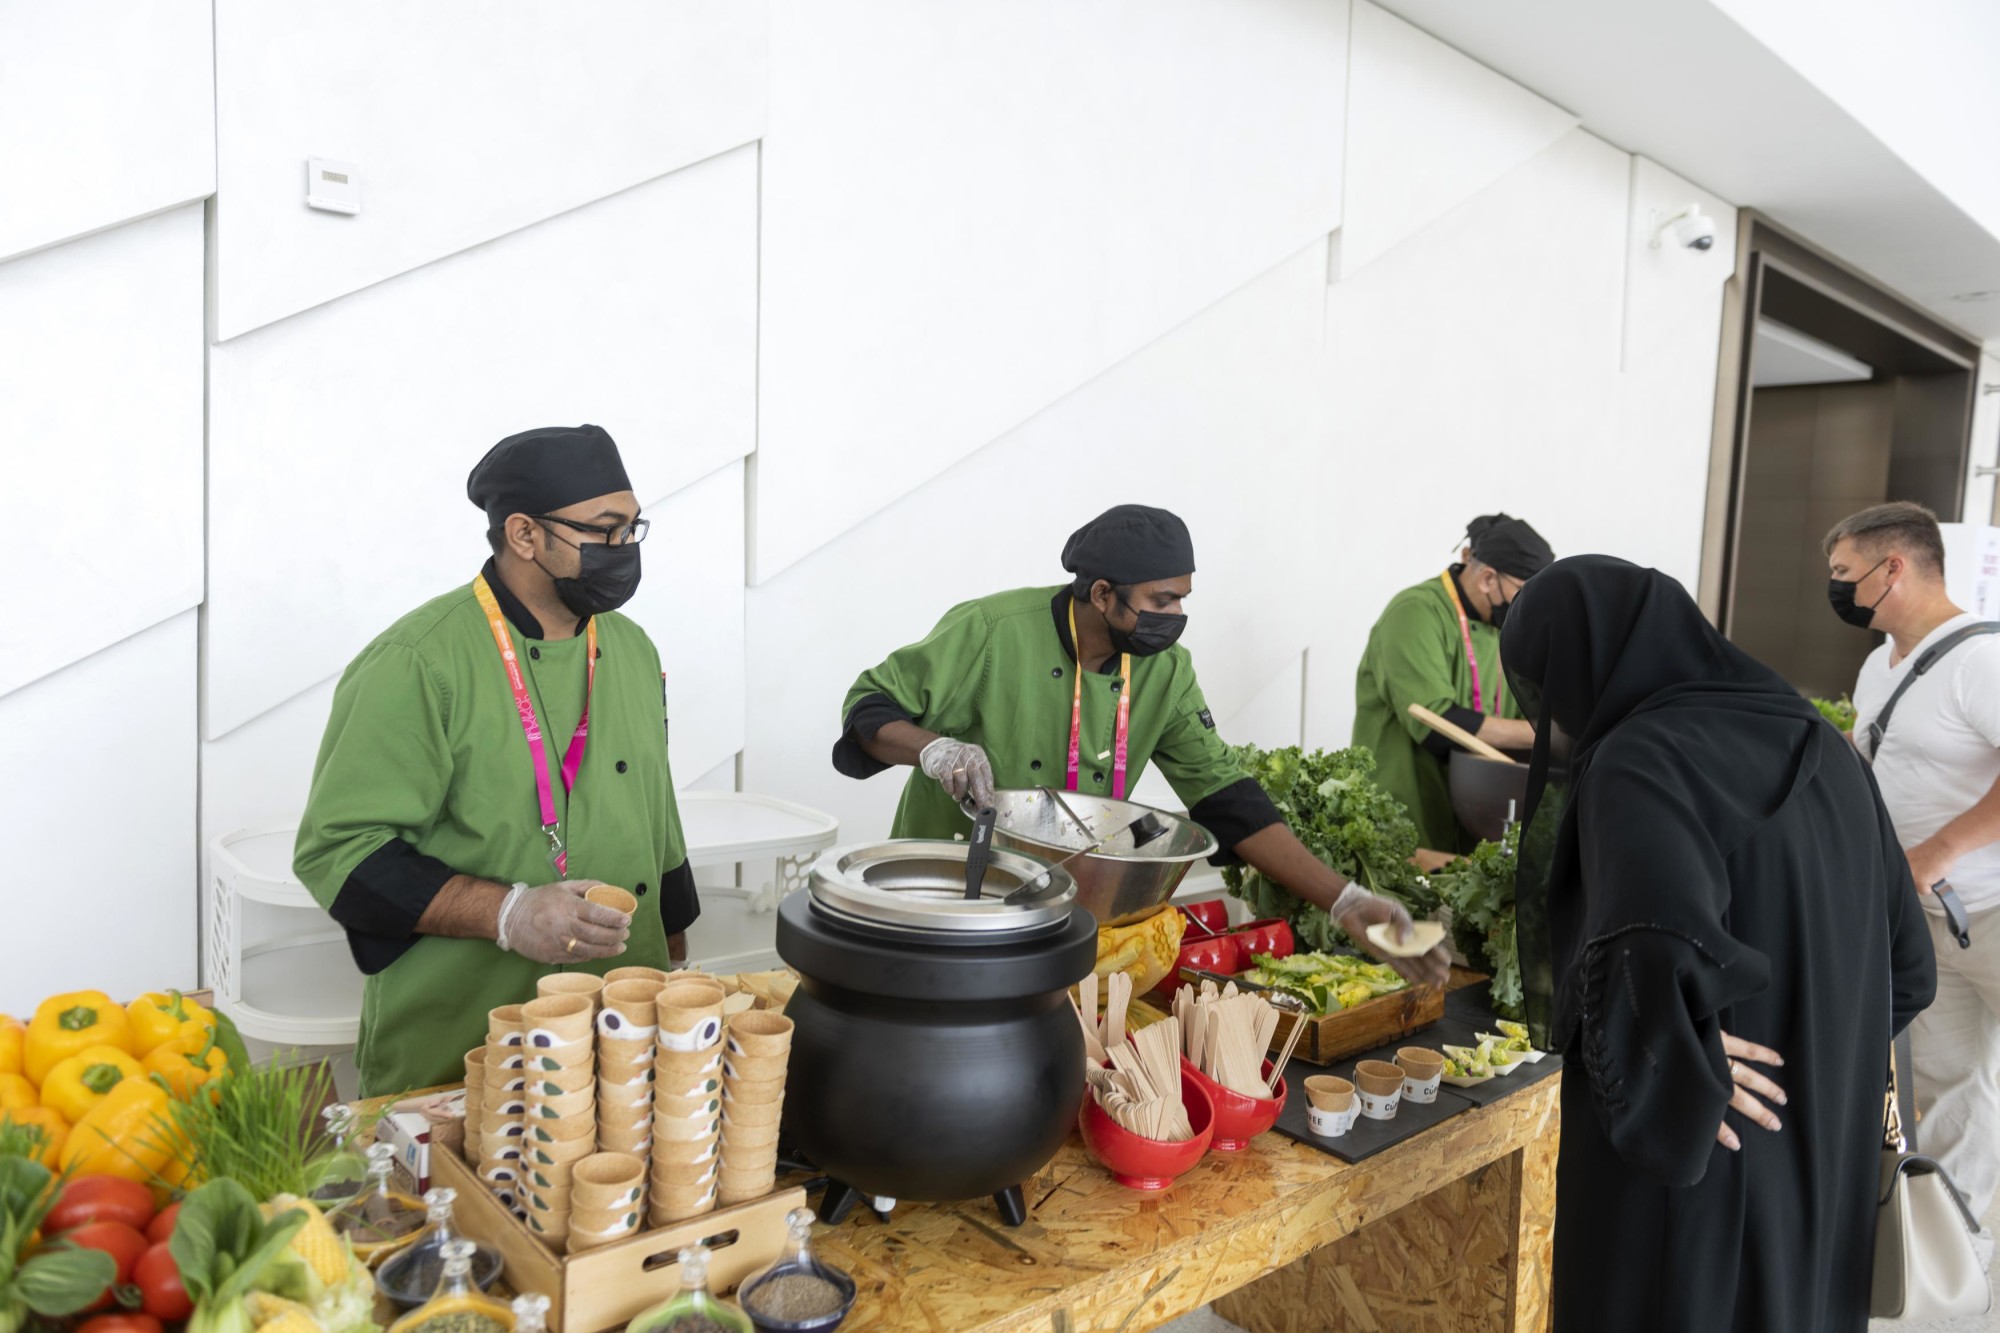 Good Food for All at Dubai Exhibition Centre m52652